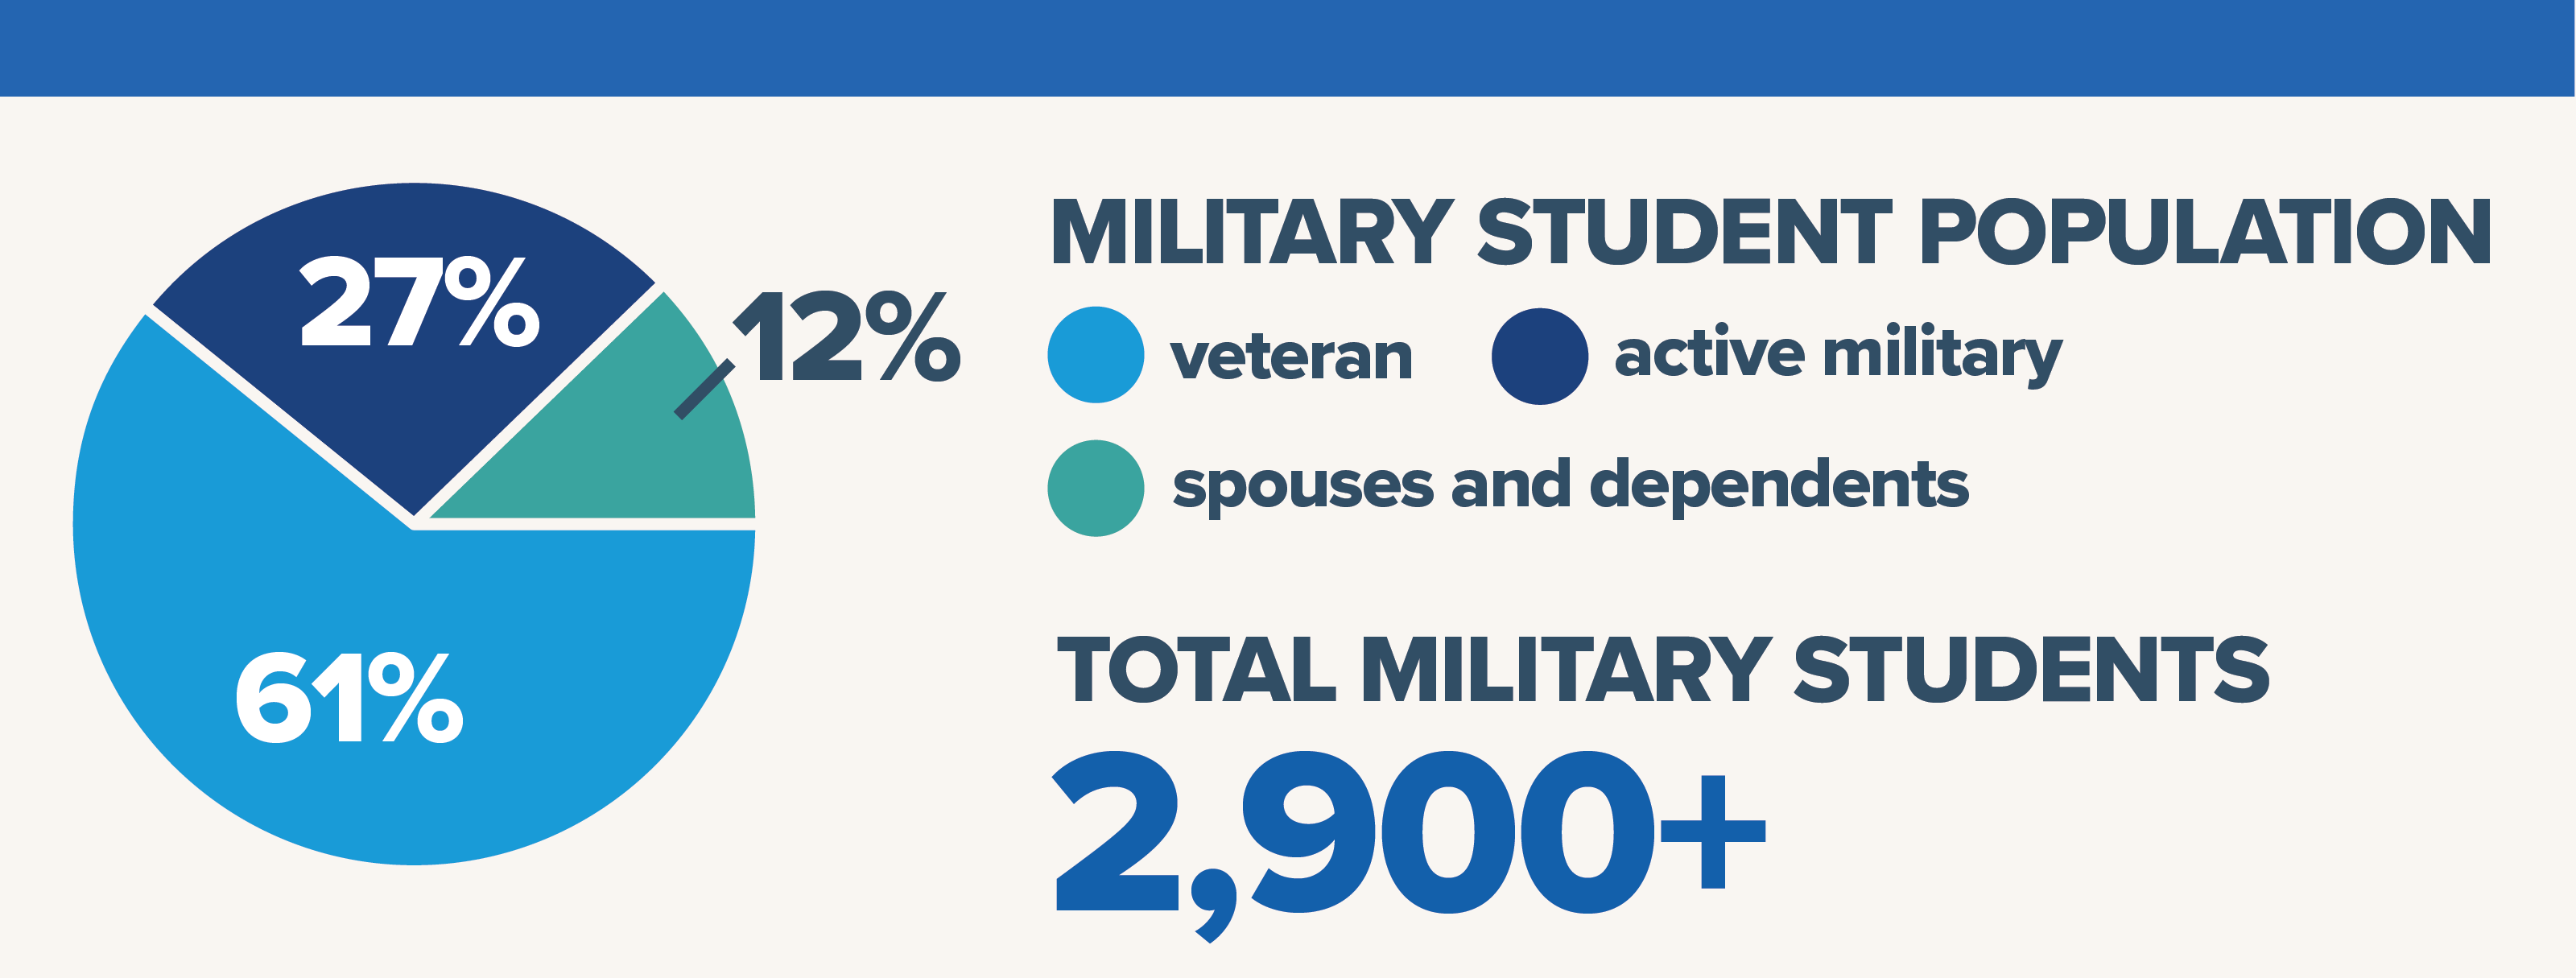 61% of our military students are veterans, 27% are active military, and 12% are spouses and dependents. Total military student population is 2,900.